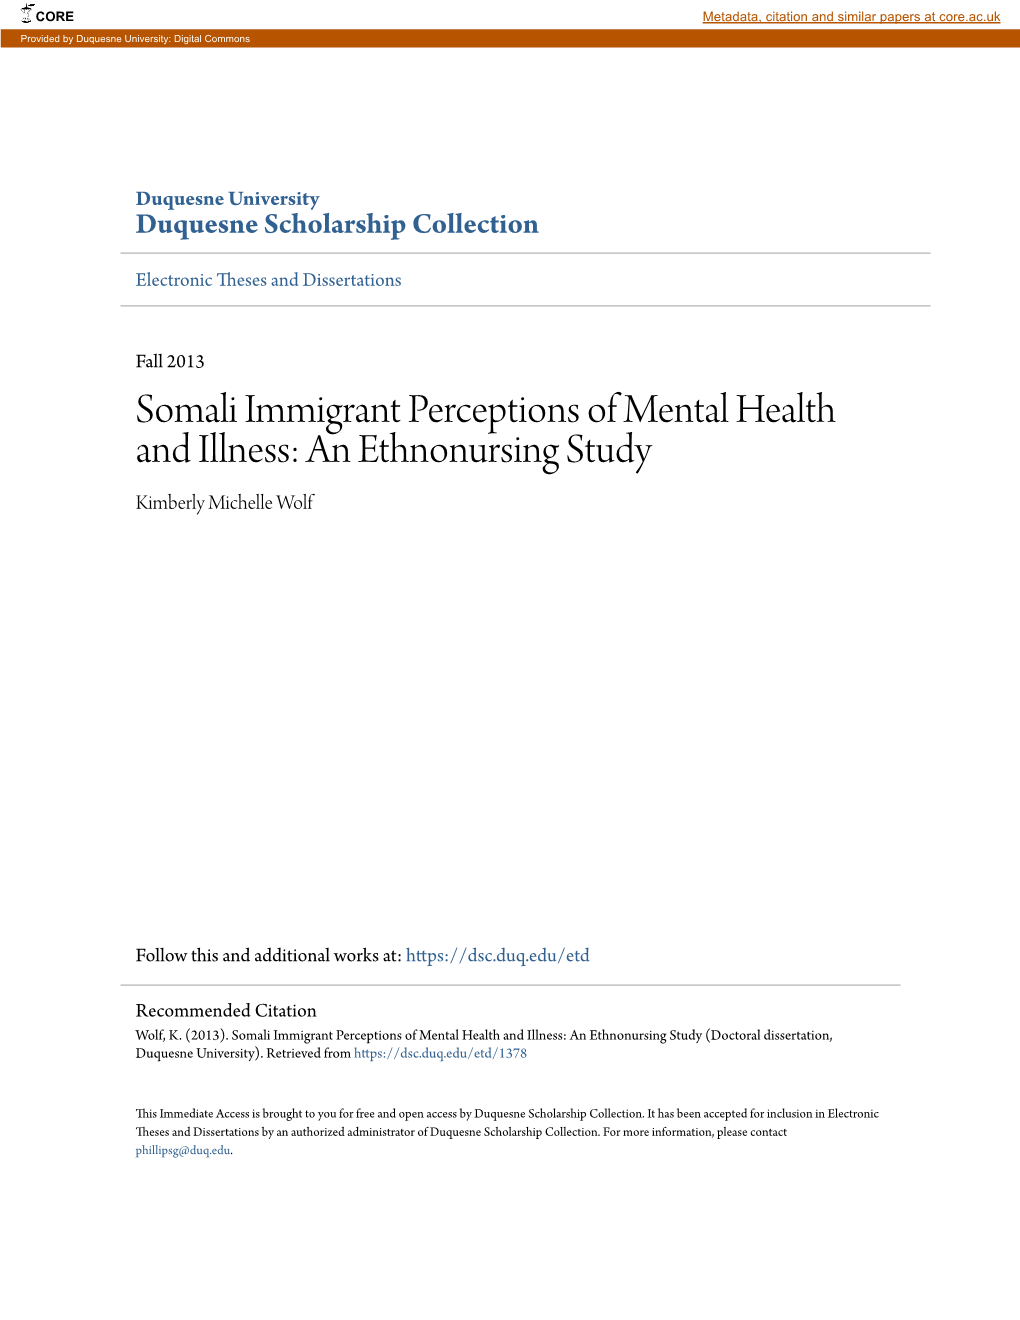 Somali Immigrant Perceptions of Mental Health and Illness: an Ethnonursing Study Kimberly Michelle Wolf